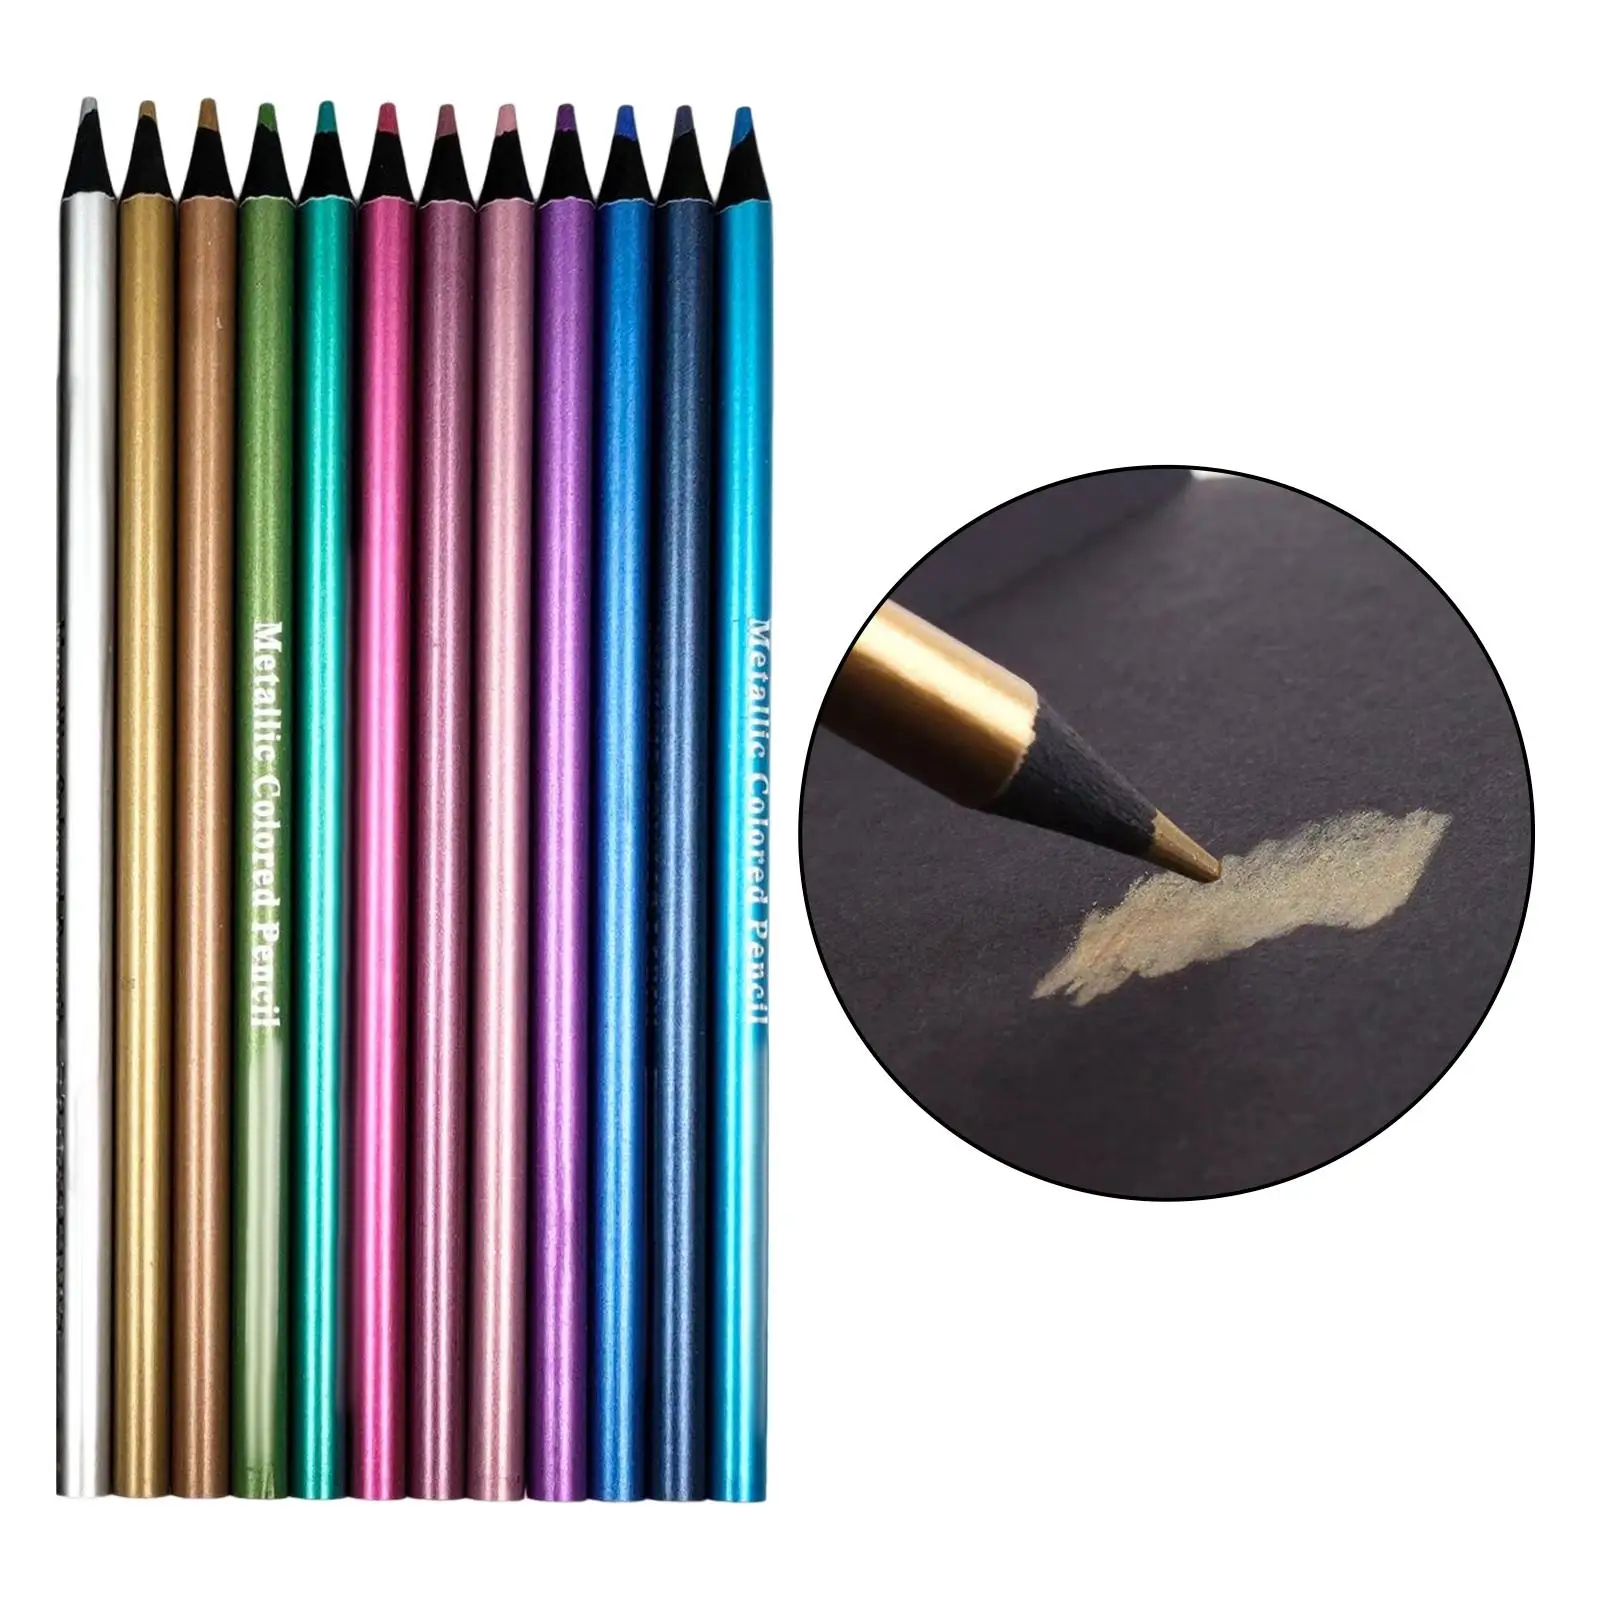 12 Color Metallic Colored Pencils Shading Sketching Coloring Painting Drawing Drawing Pencils for Birthday Gift Art Supplies